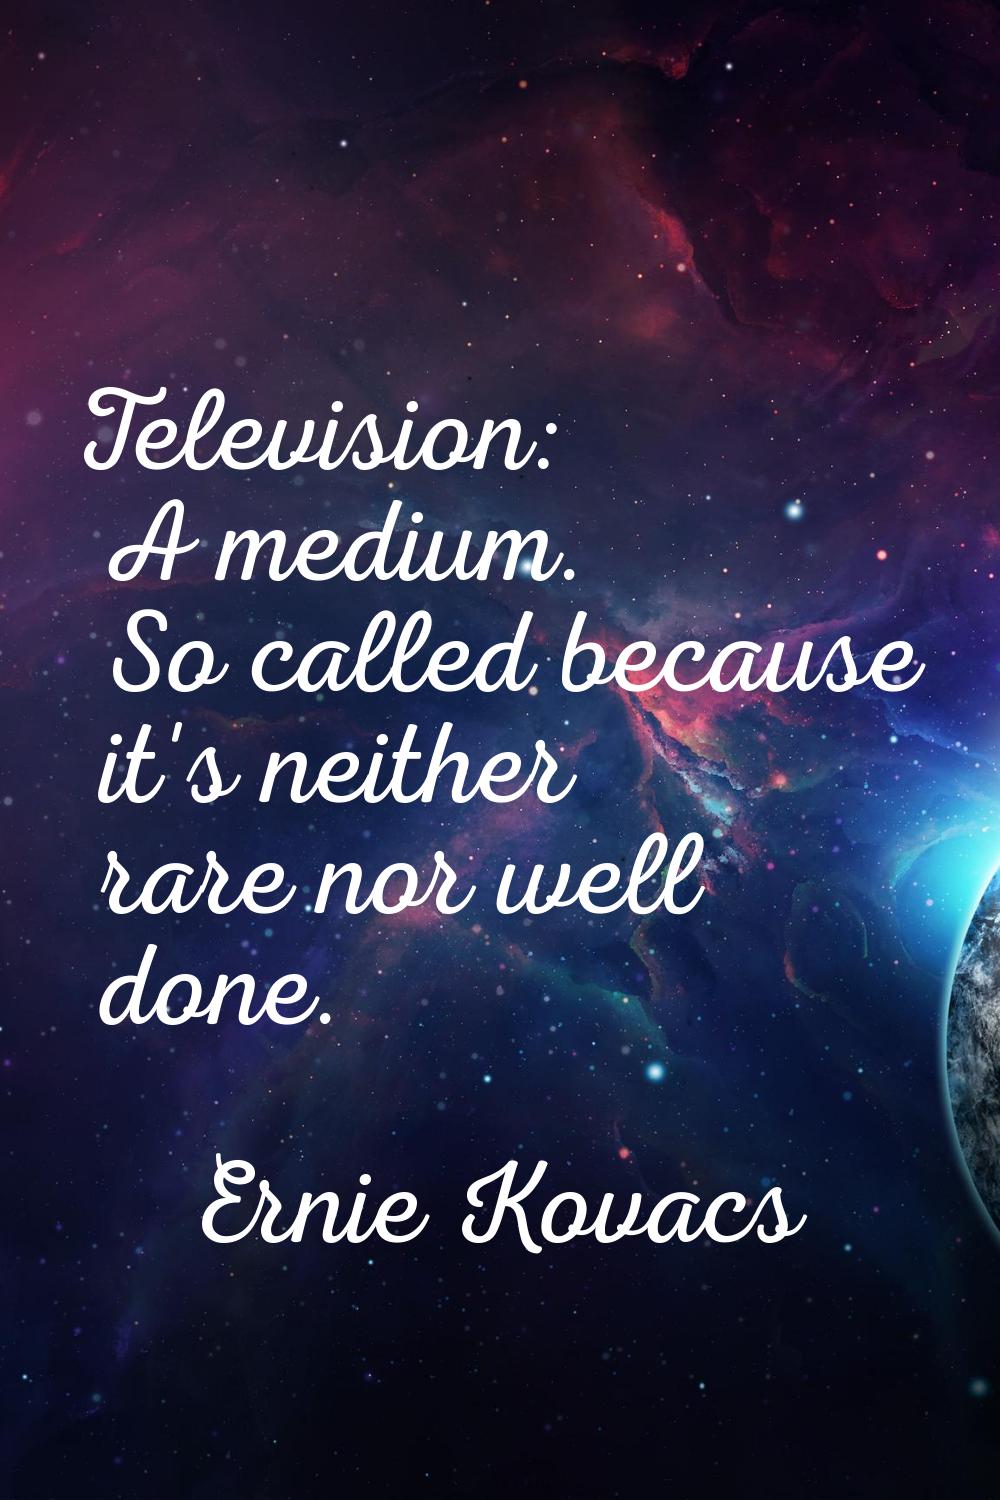 Television: A medium. So called because it's neither rare nor well done.